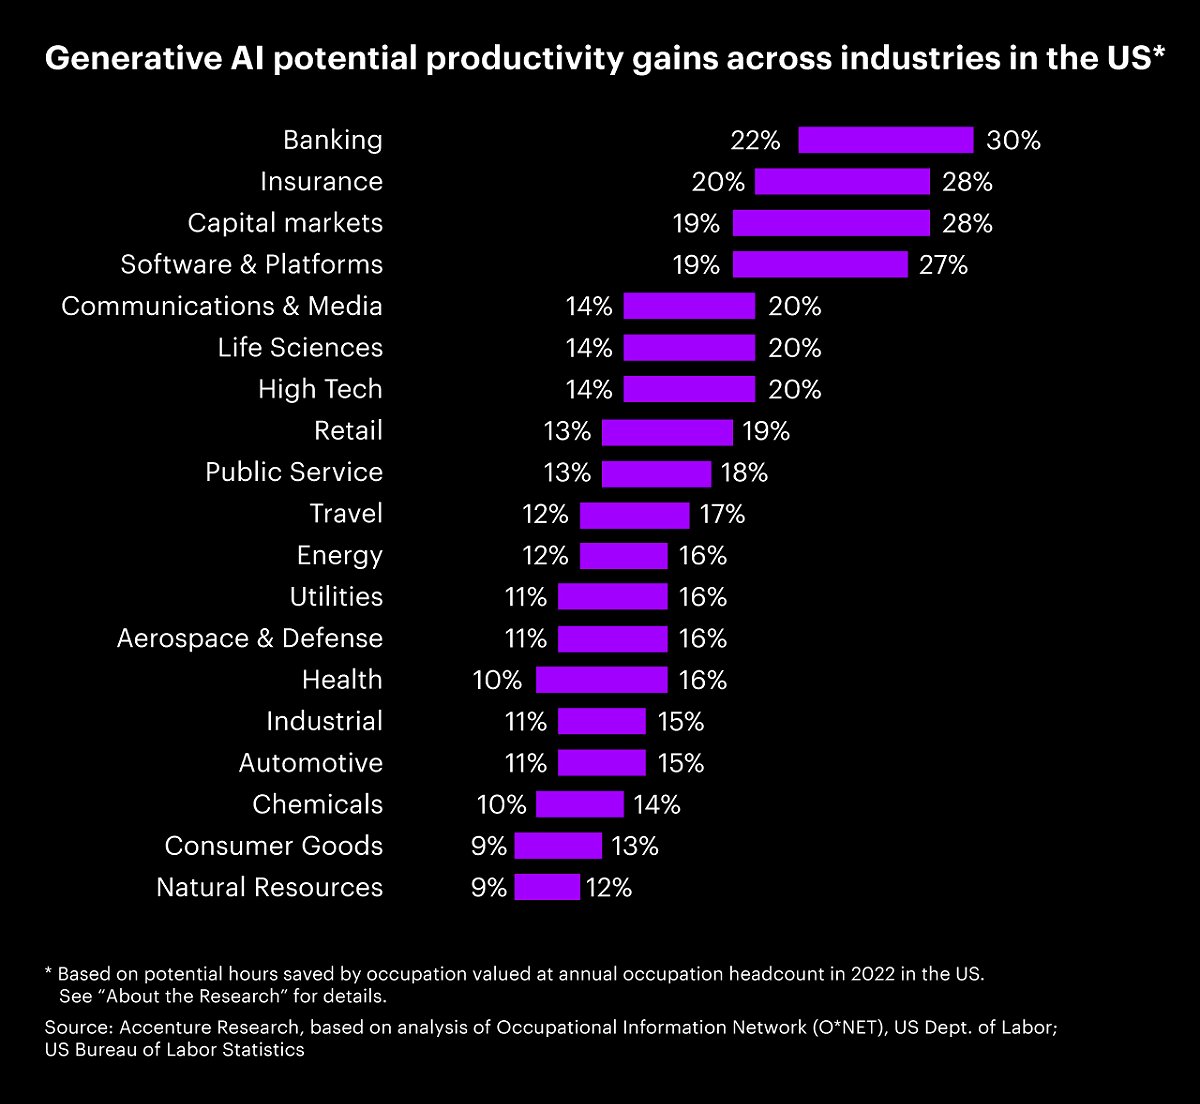 Generative AI potential productivity gains across industries in the US. This chart shows potential productivity gains due to gen AI by industry: Banking 22% to 30% gain, Insurance 20% to 28%, Capital Markets 19% to 28%, Software and Platforms 19% to 27%, Communications and media, Life Sciences and High Tech gained 14% to 20%, Retail 13% to 19%, Public service 13% to 18%, Travel 12% to 17%, Energy 12% to 16%, Utilities and Aerospace & Defense gained 11% to 16%, Health 10% to 16%, Industrial and Automotive gained 11% to 15%, Chemicals 10% to 14%, Consumer goods 9% to 13%, and finally Natural resources gained 9% to 12%.